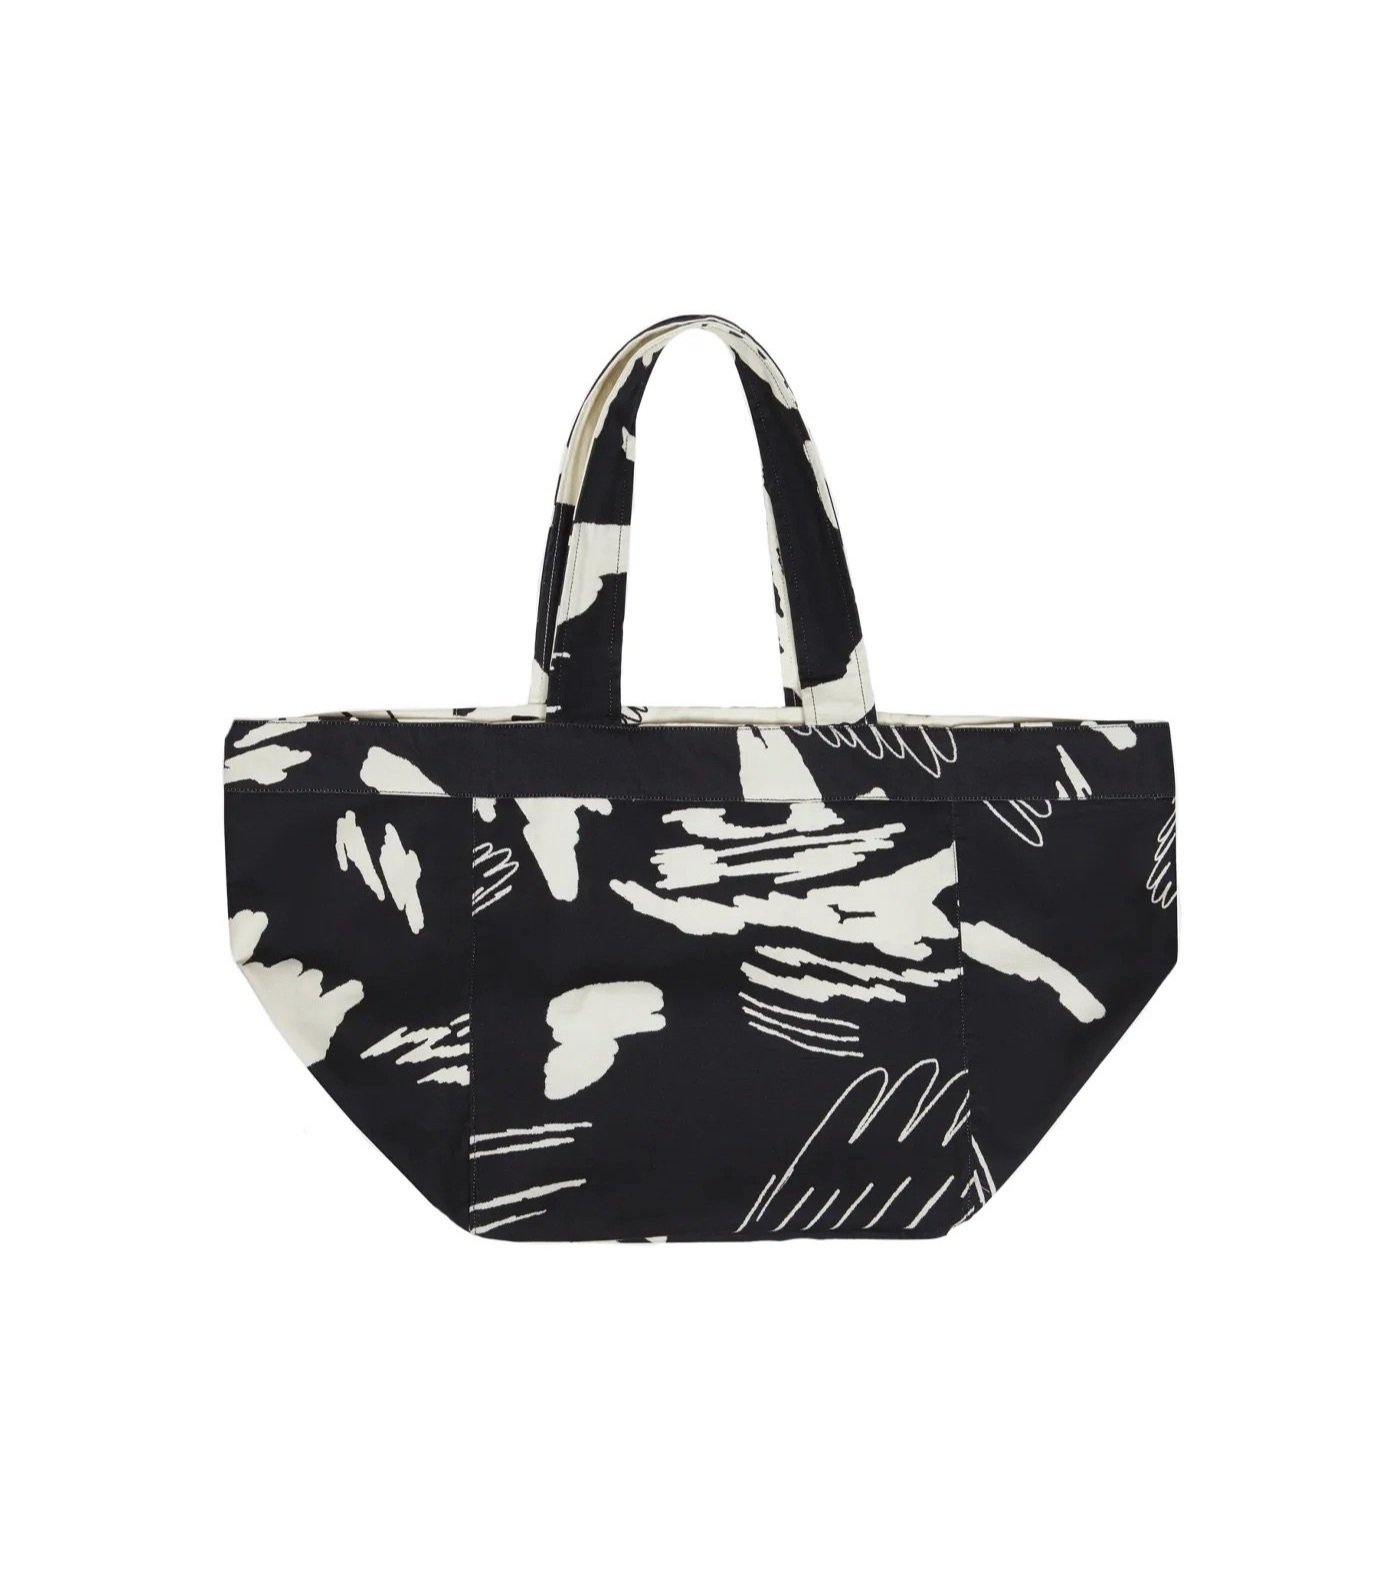 5 of the best black tote bags